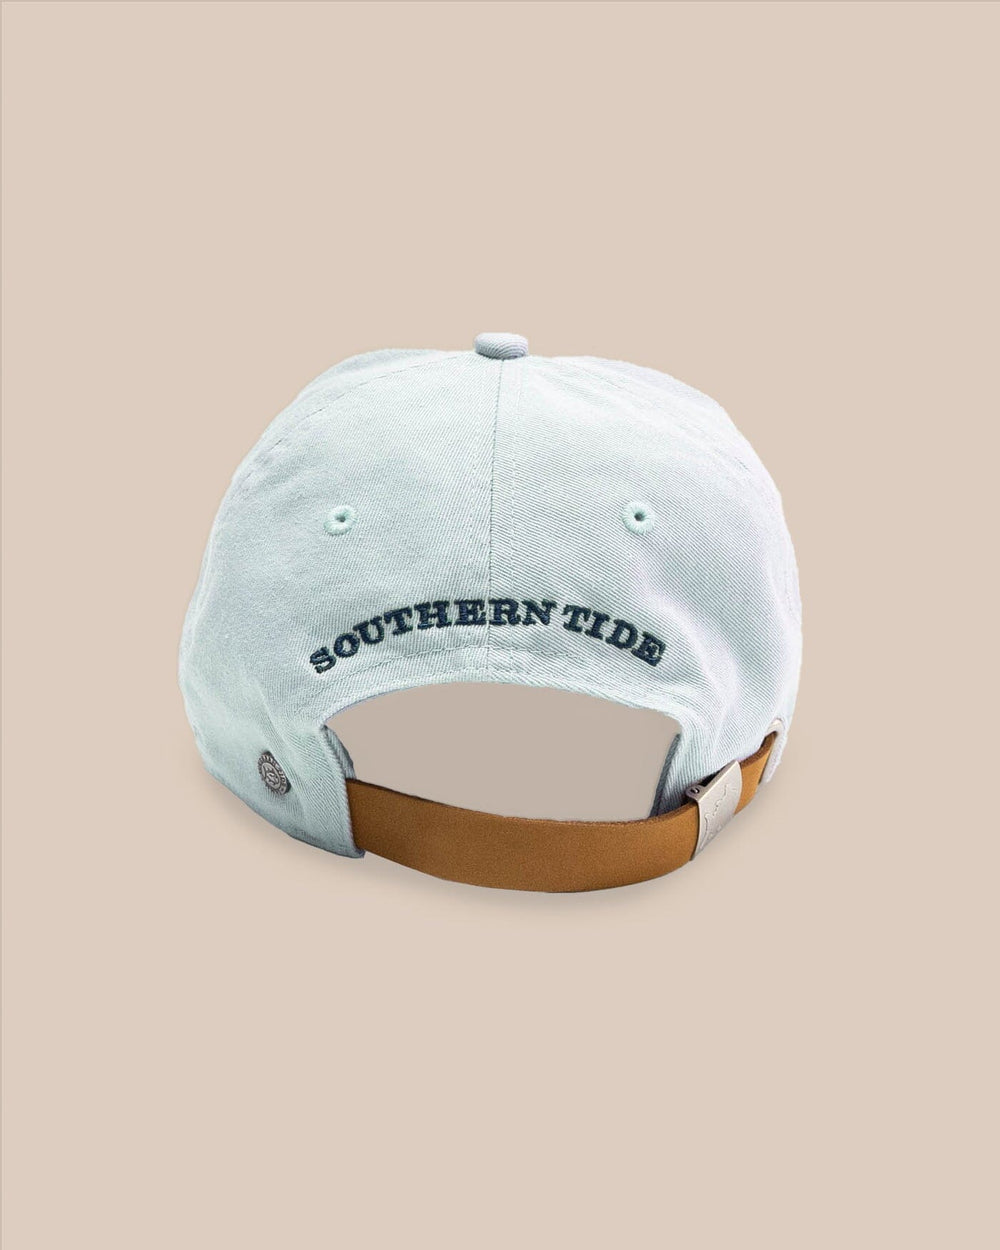 The back view of the Southern Tide Mini Skipjack Leather Strap Hat by Southern Tide - Blue